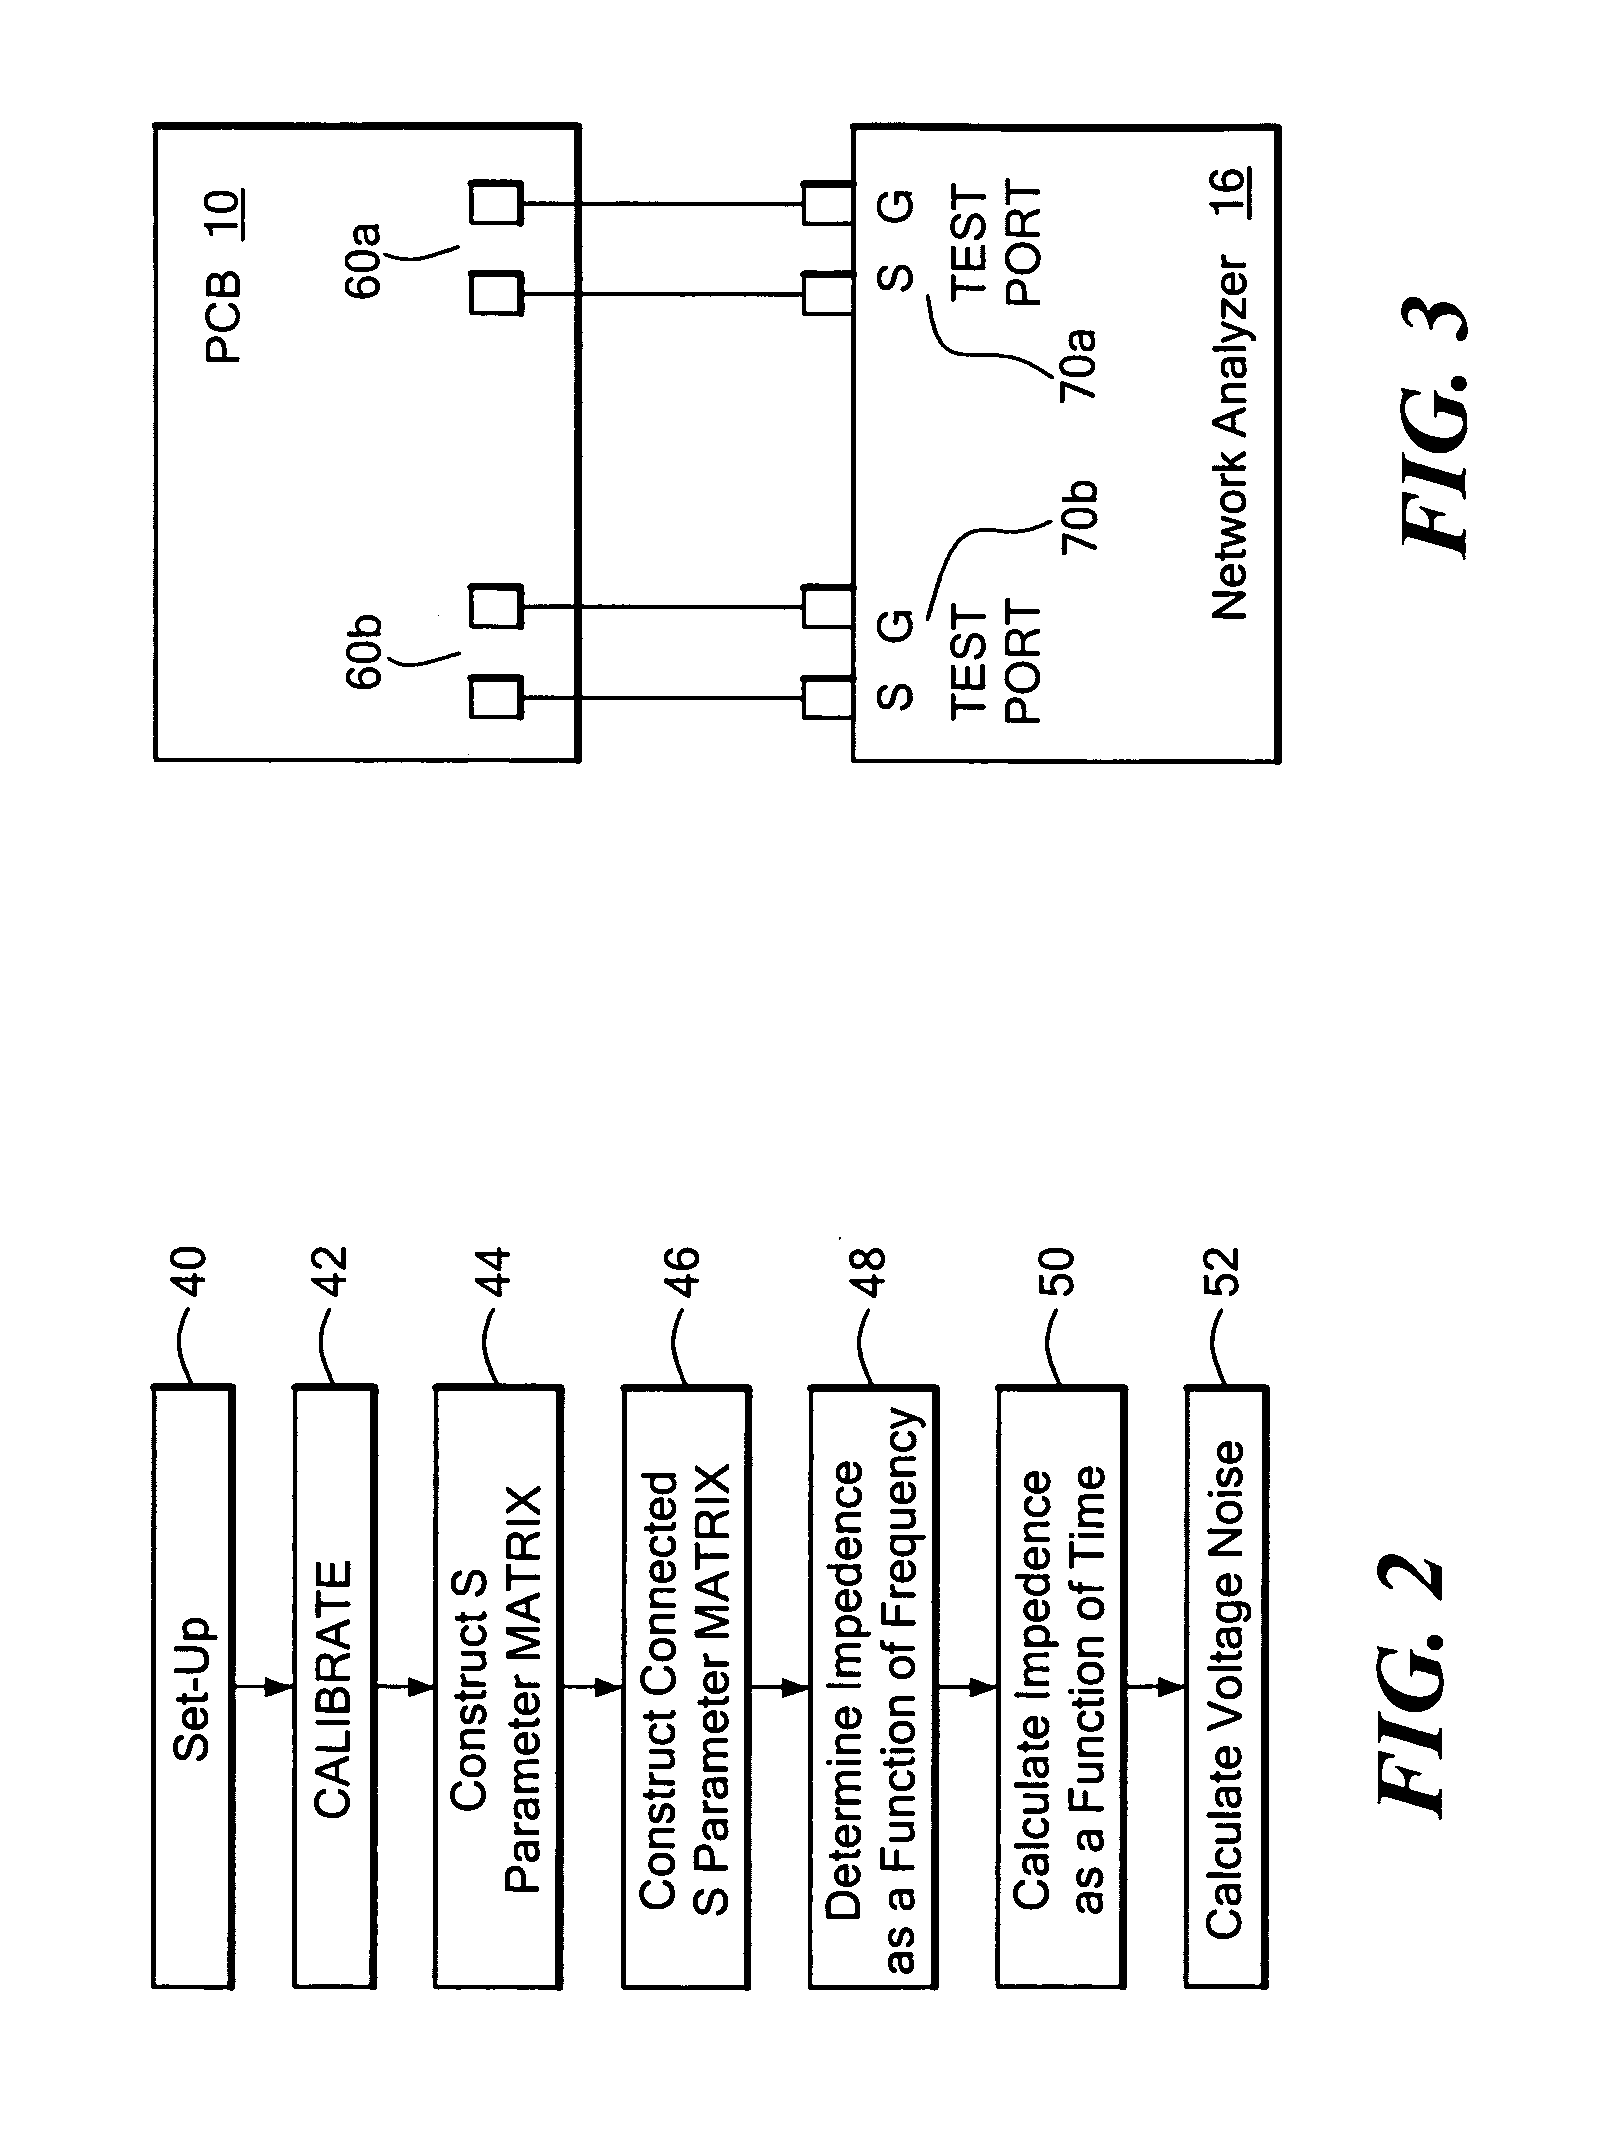 Method and system of characterizing a device under test